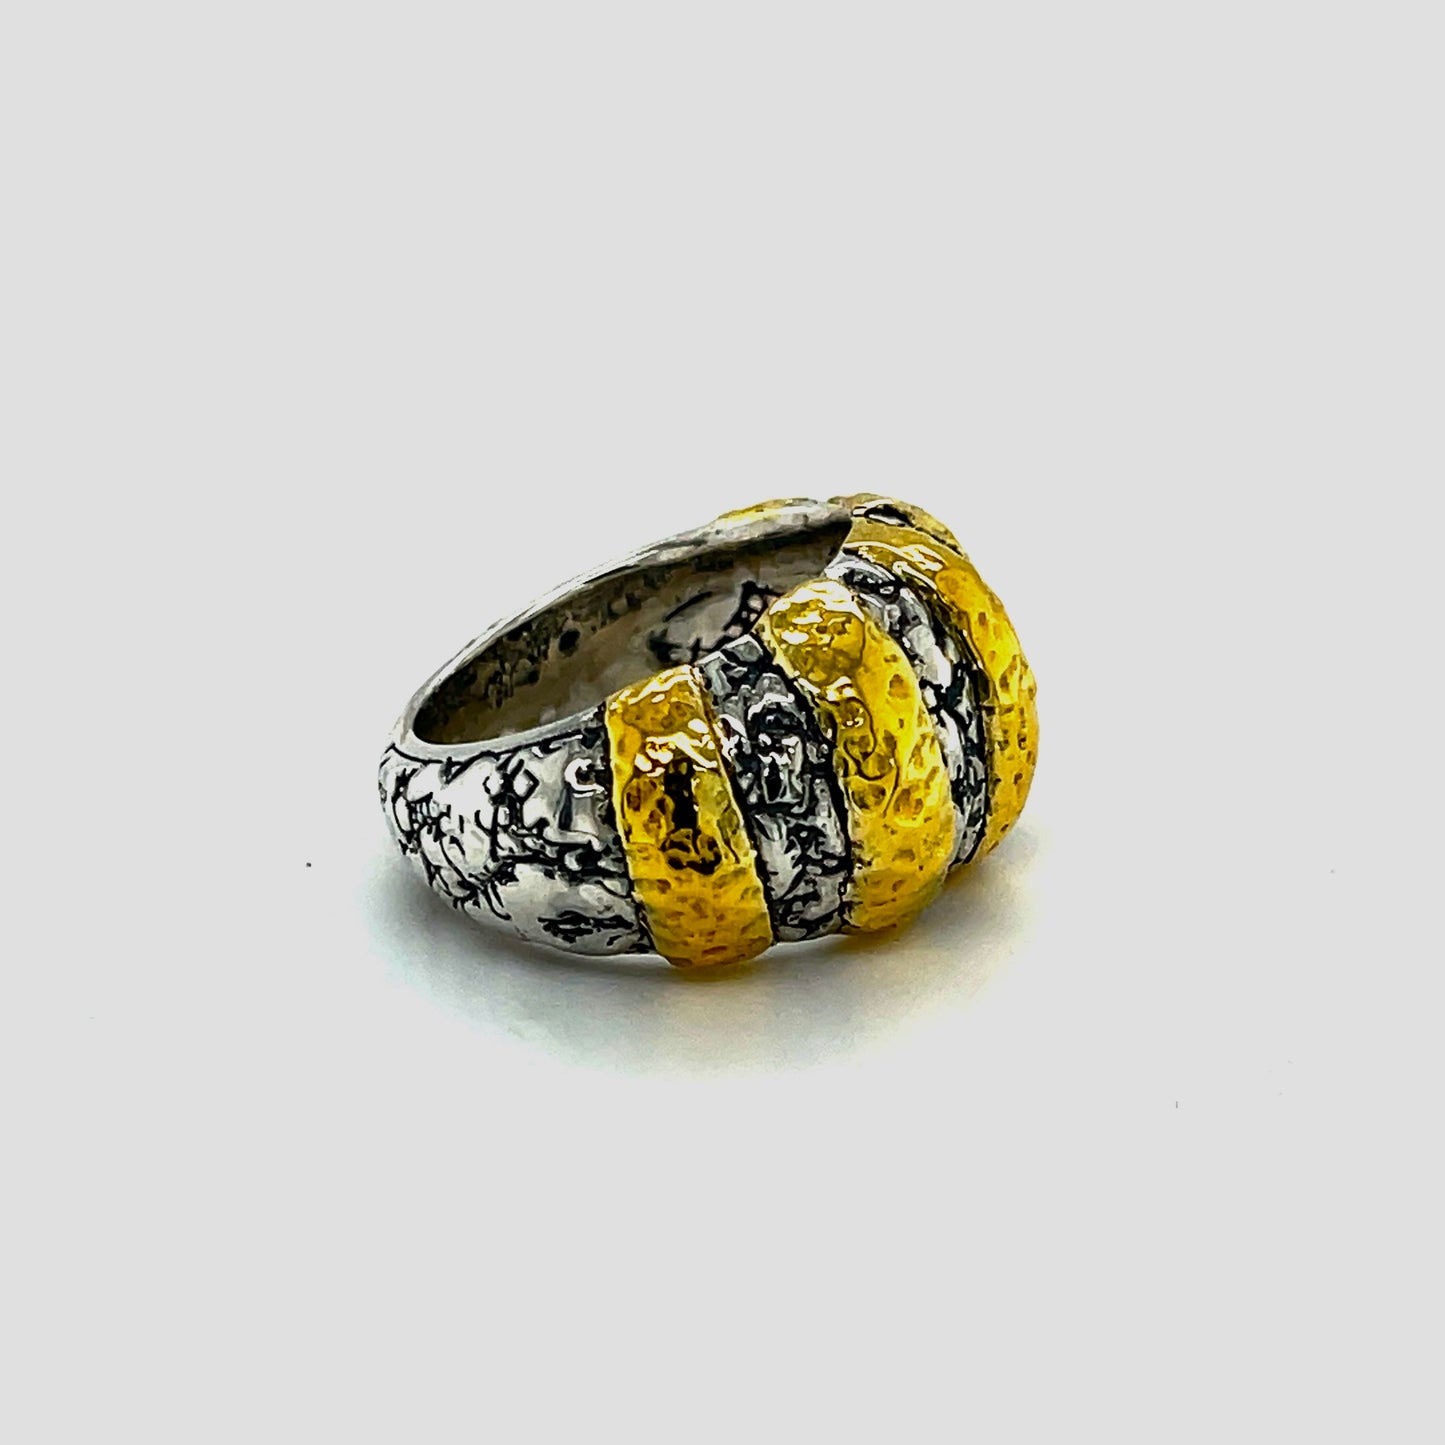 Silver ring with 18kt Gold accent